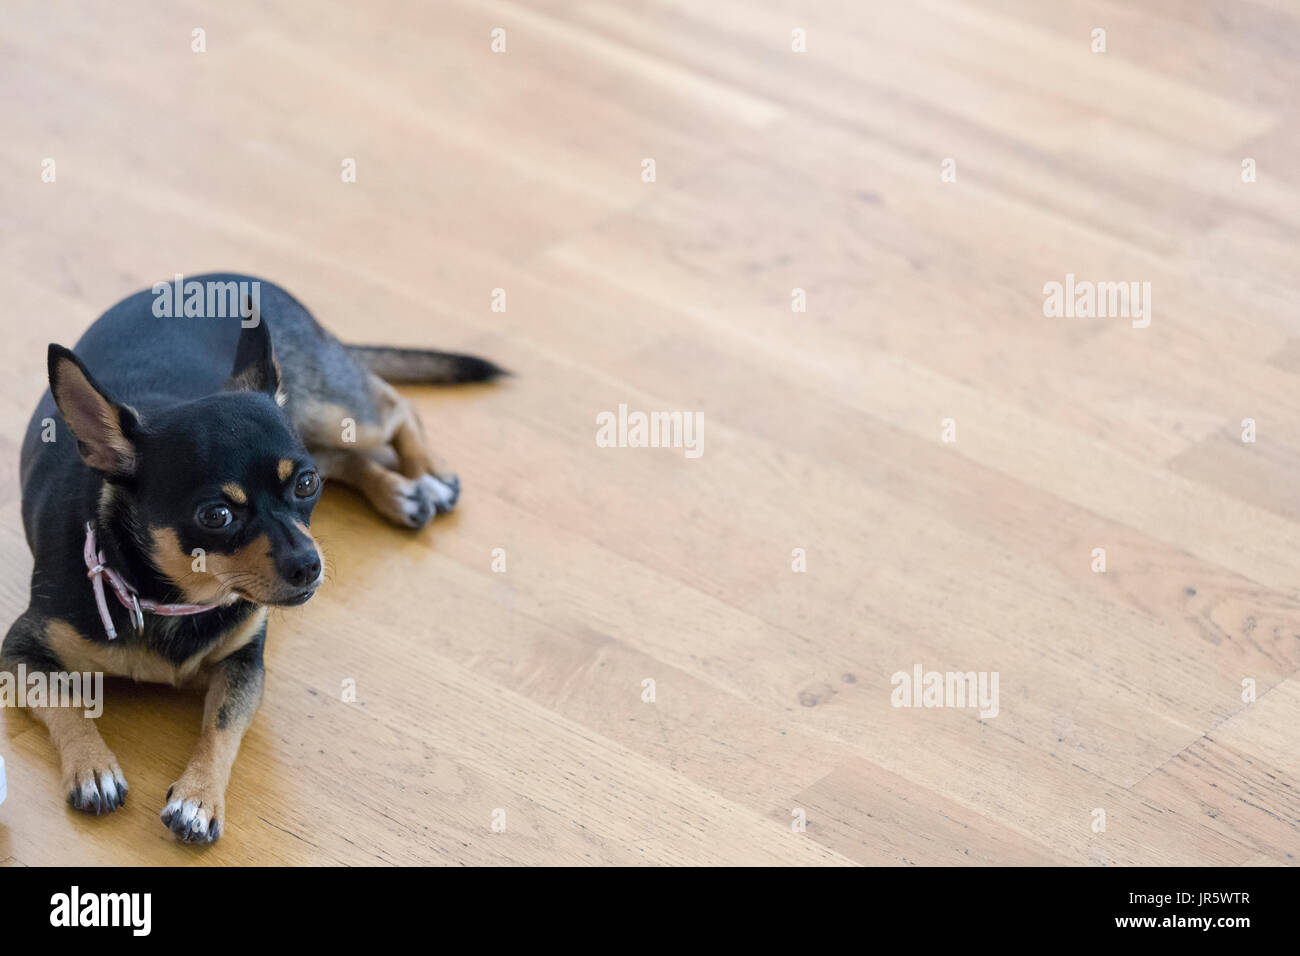 Cute black small female Chihuahua dog looking at camera laying down on wooden floor with plenty of copy space  Model Release: No.  Property Release: Yes. Stock Photo